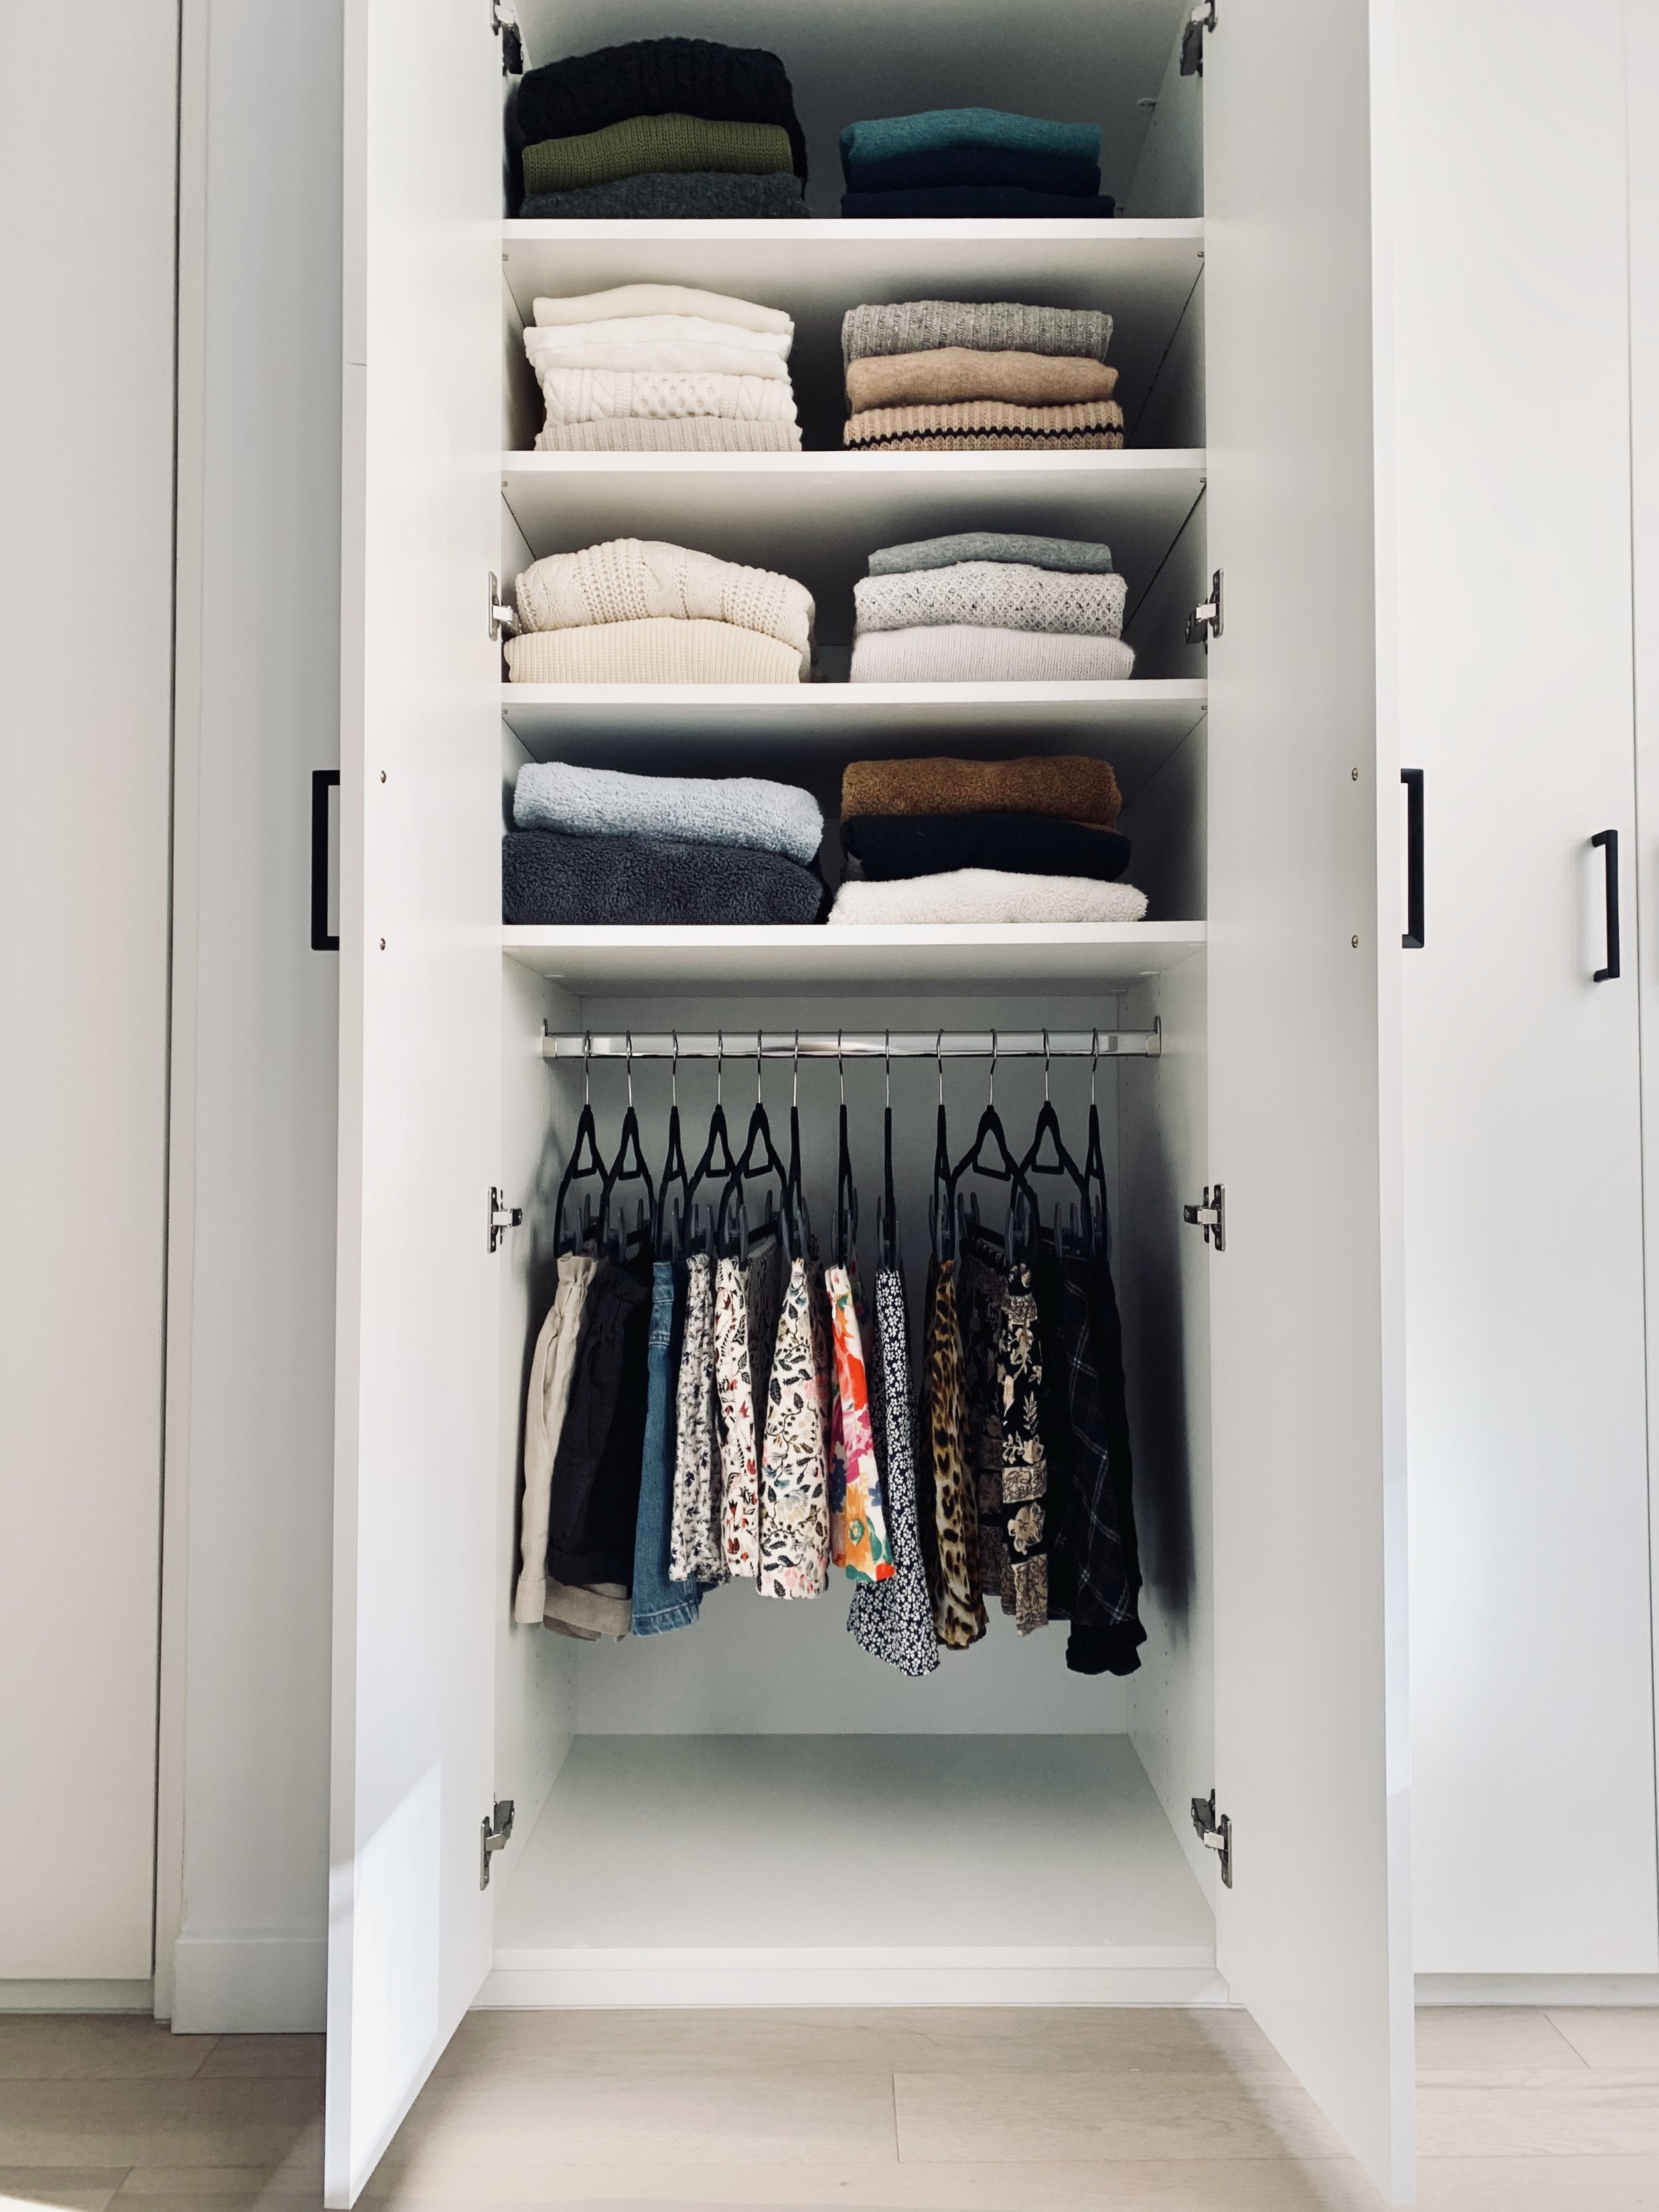 Space-Saving Hangers For A Clean Closet - Inspire Uplift - Inspire Uplift